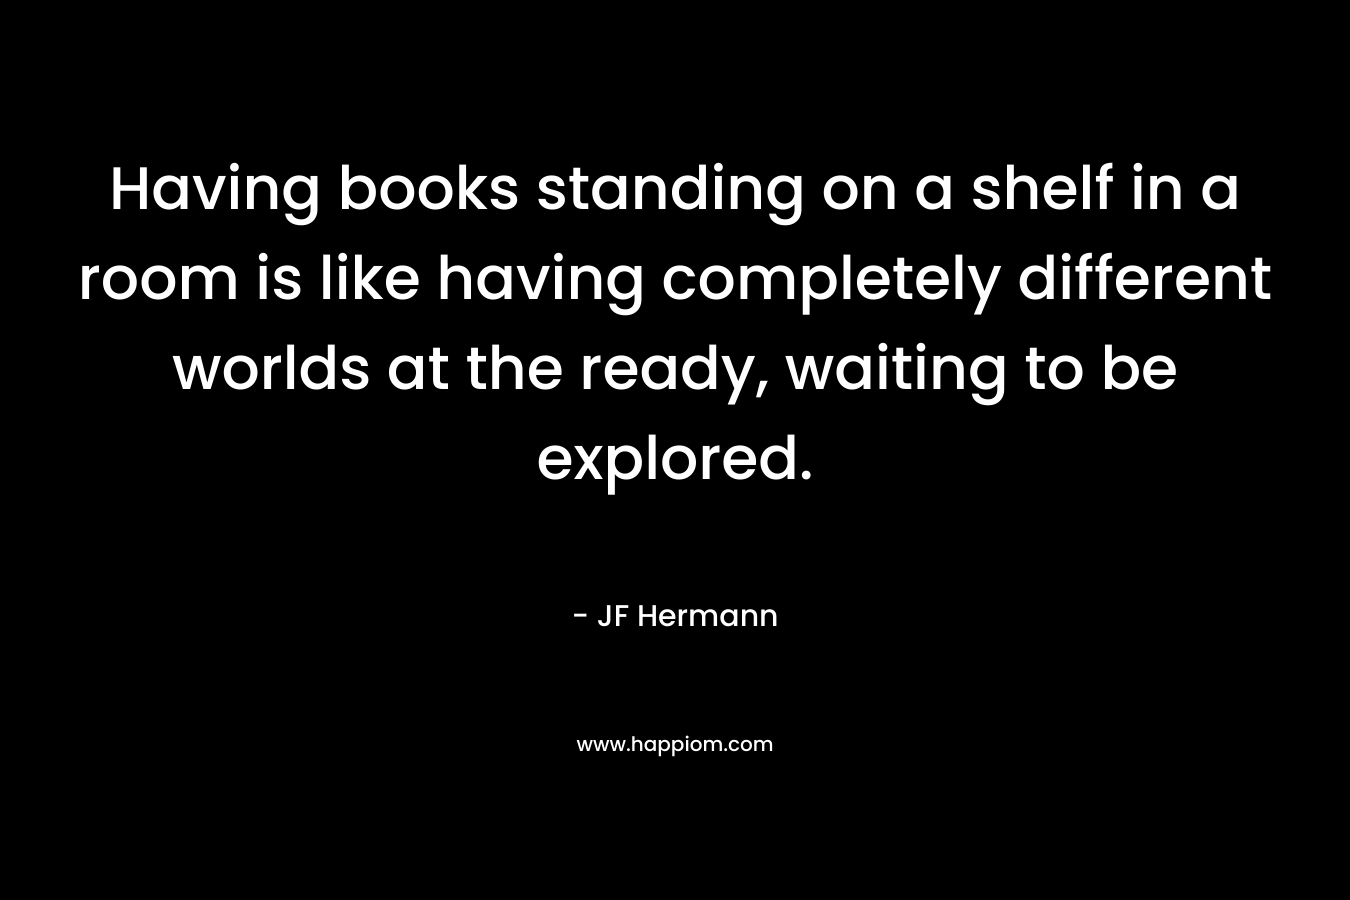 Having books standing on a shelf in a room is like having completely different worlds at the ready, waiting to be explored. – JF Hermann